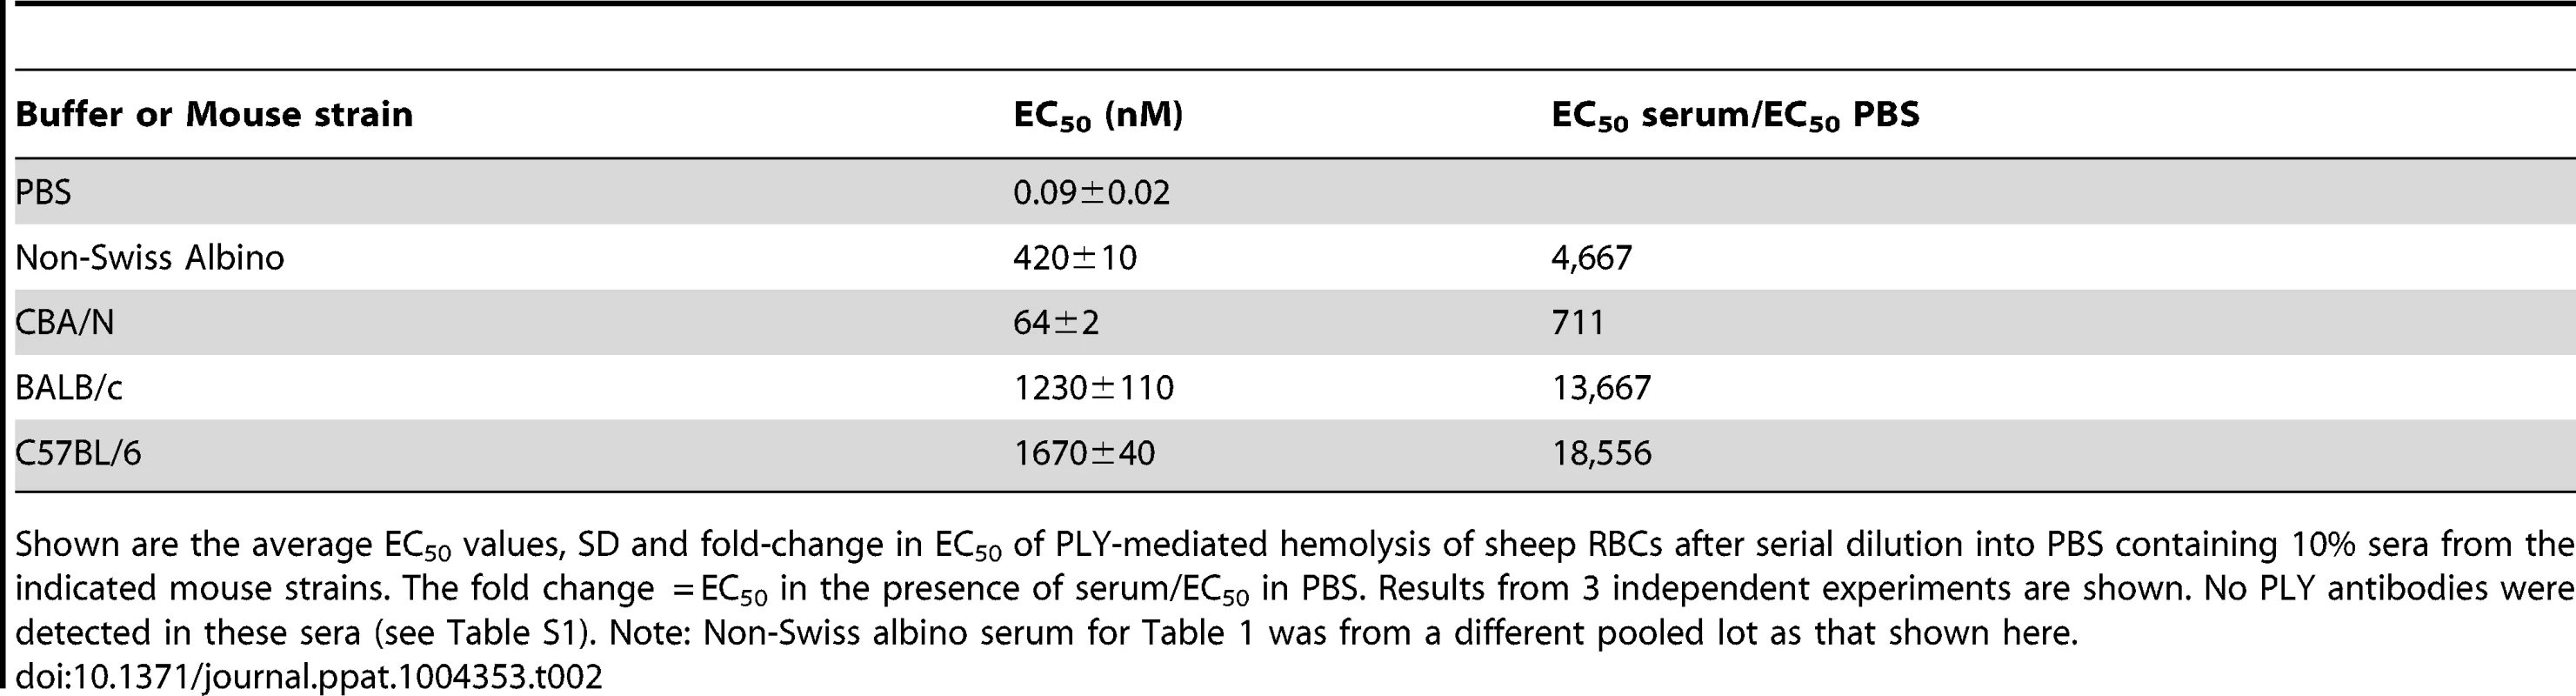 Inhibition of PLY hemolytic activity by serum from different mouse strains.